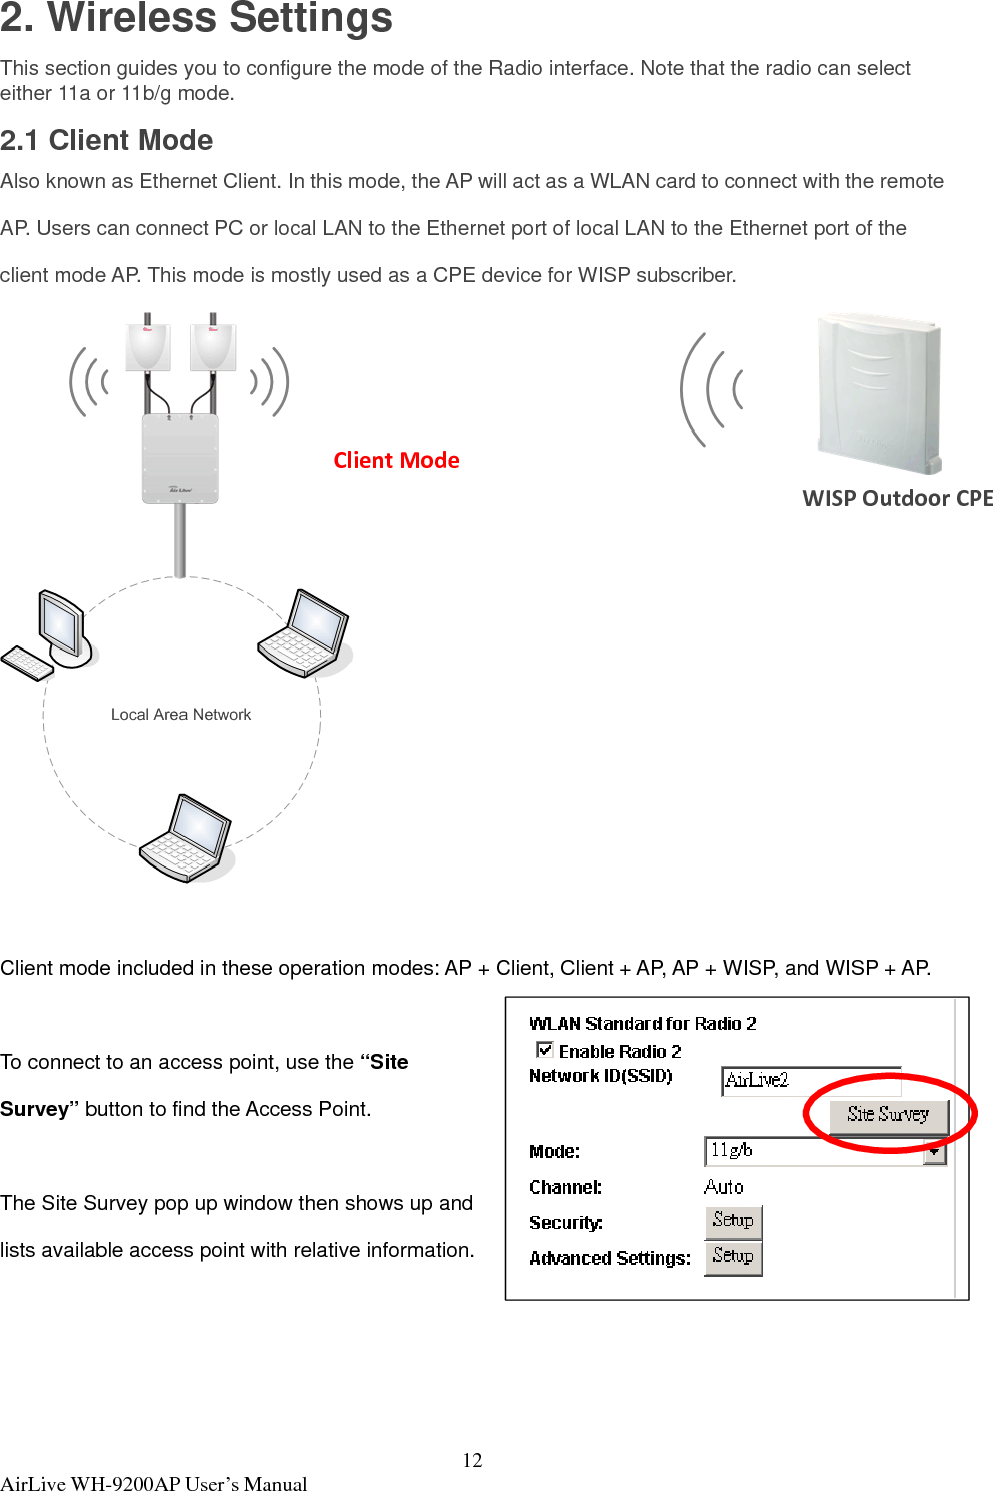  AirLive WH-9200AP User’s Manual  122. Wireless Settings This section guides you to configure the mode of the Radio interface. Note that the radio can select either 11a or 11b/g mode. 2.1 Client Mode Also known as Ethernet Client. In this mode, the AP will act as a WLAN card to connect with the remote AP. Users can connect PC or local LAN to the Ethernet port of local LAN to the Ethernet port of the client mode AP. This mode is mostly used as a CPE device for WISP subscriber.   Client mode included in these operation modes: AP + Client, Client + AP, AP + WISP, and WISP + AP.  To connect to an access point, use the “Site Survey” button to find the Access Point.  The Site Survey pop up window then shows up and lists available access point with relative information.  ClientModeWISPOutdoorCPE